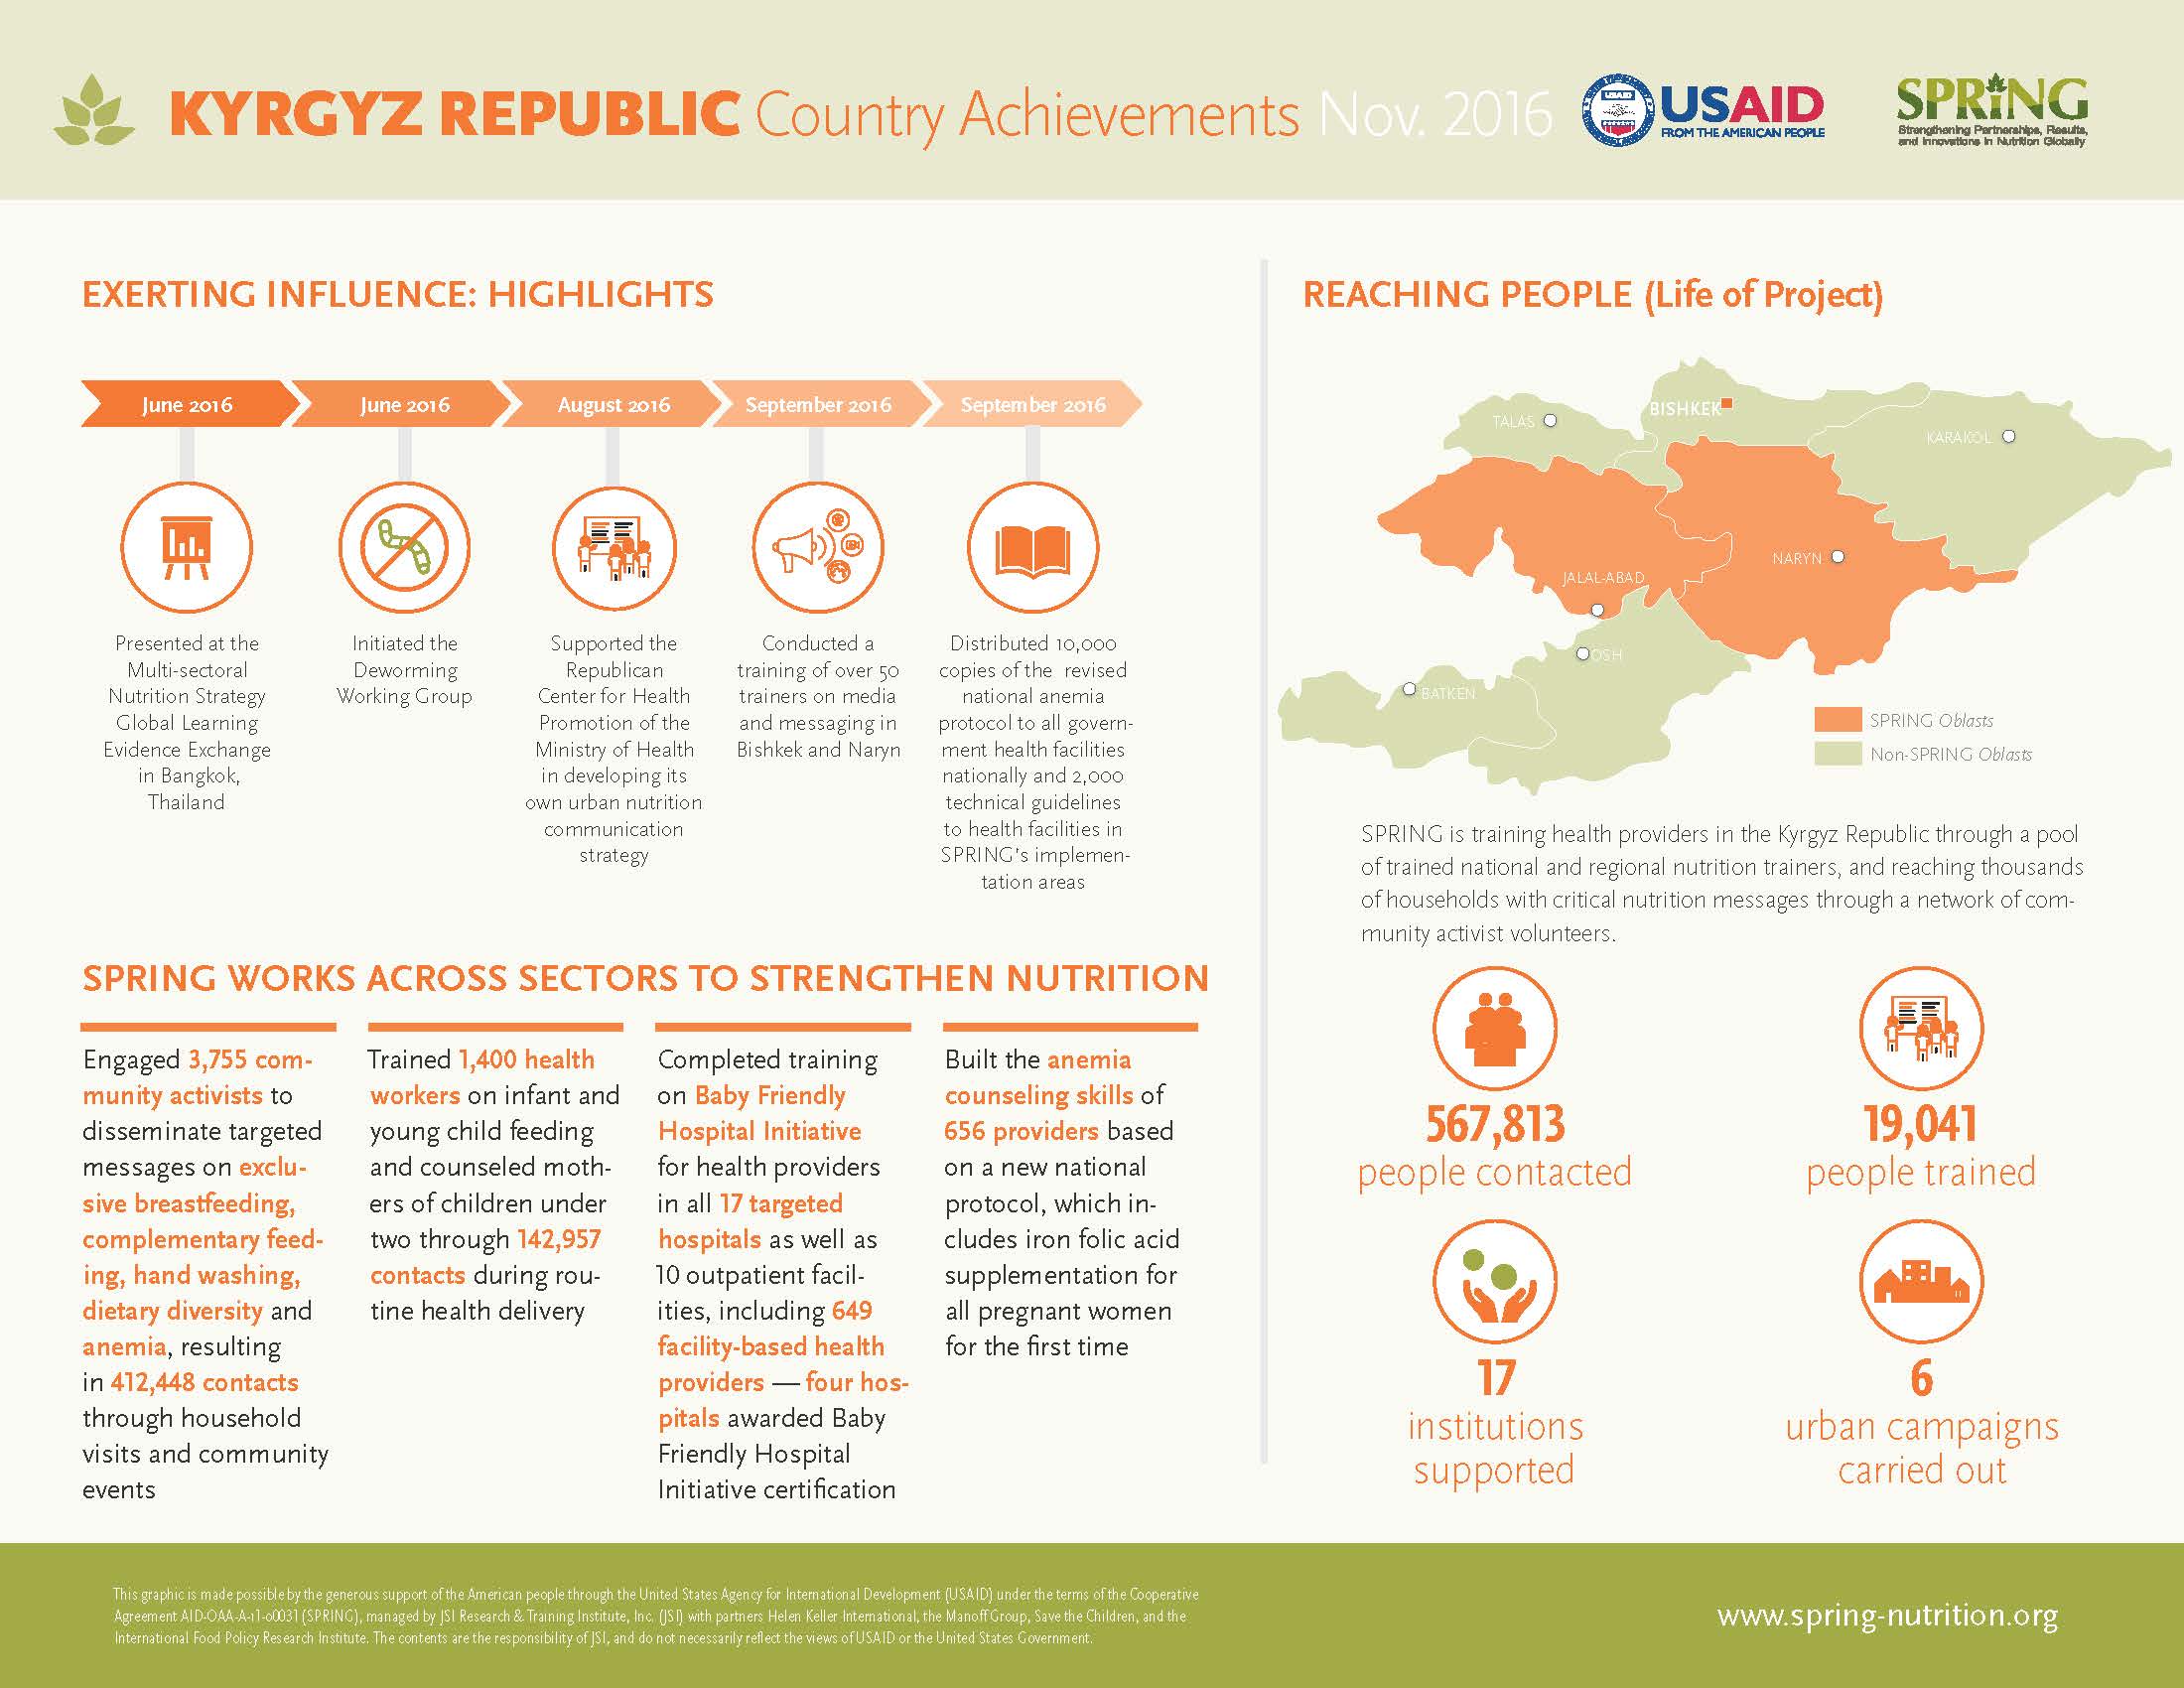 Kyrgyz Republic Country Achievements, Project Year 5